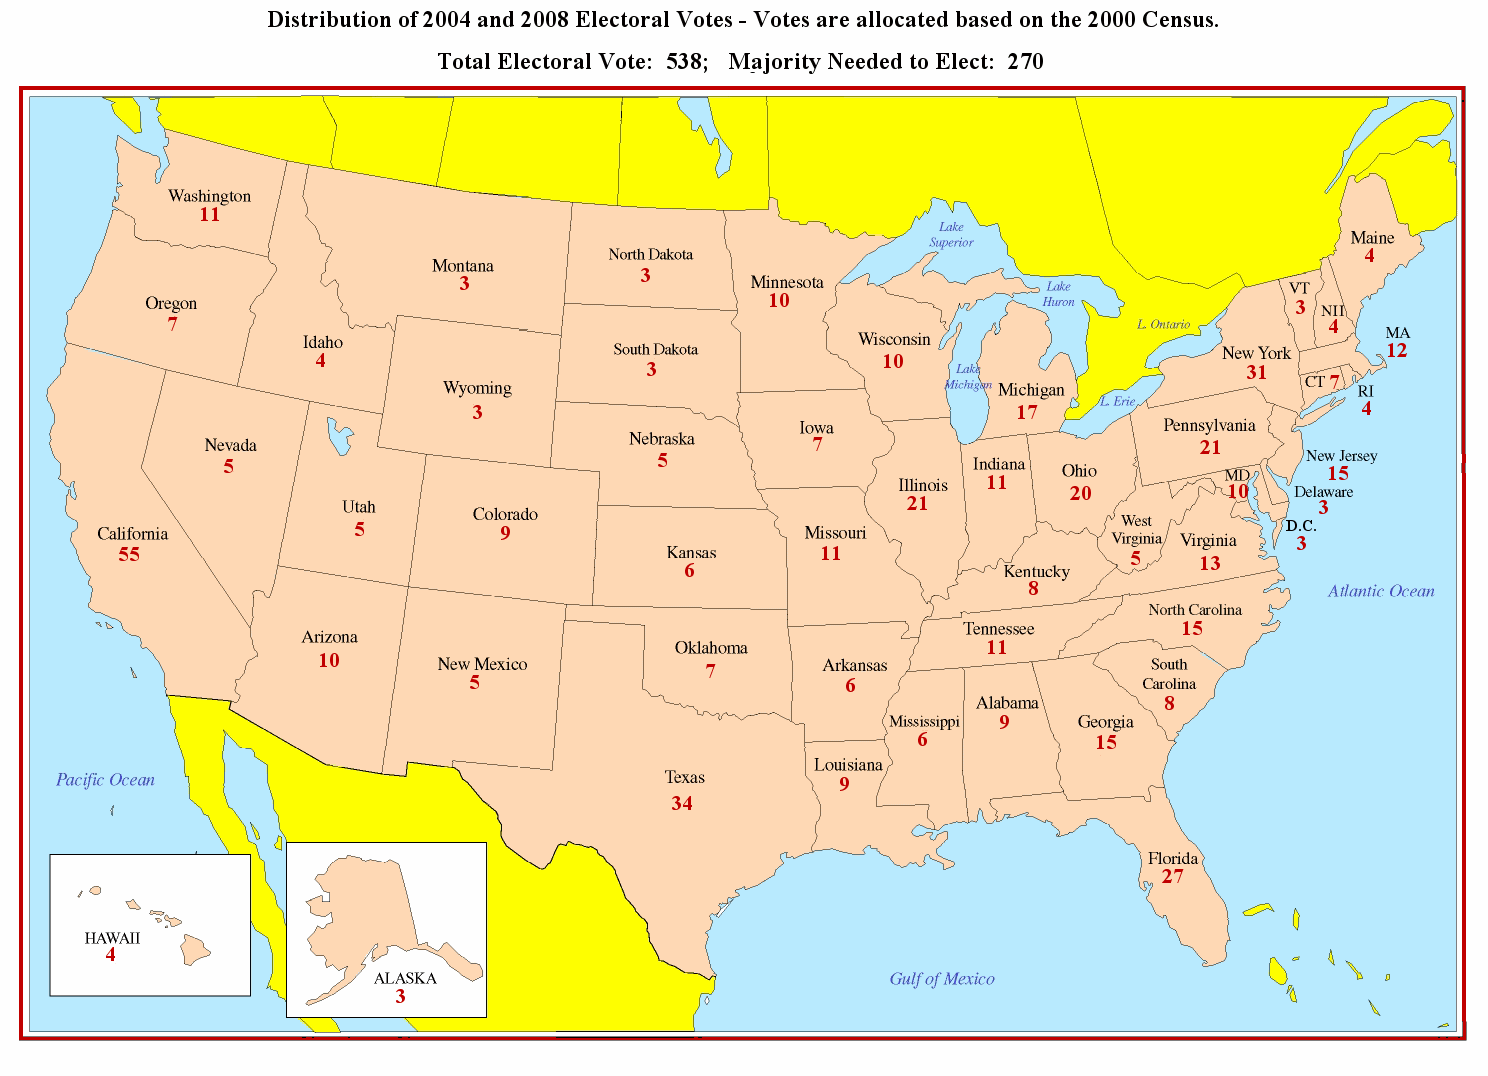 Outline Map Of Usa With State Names